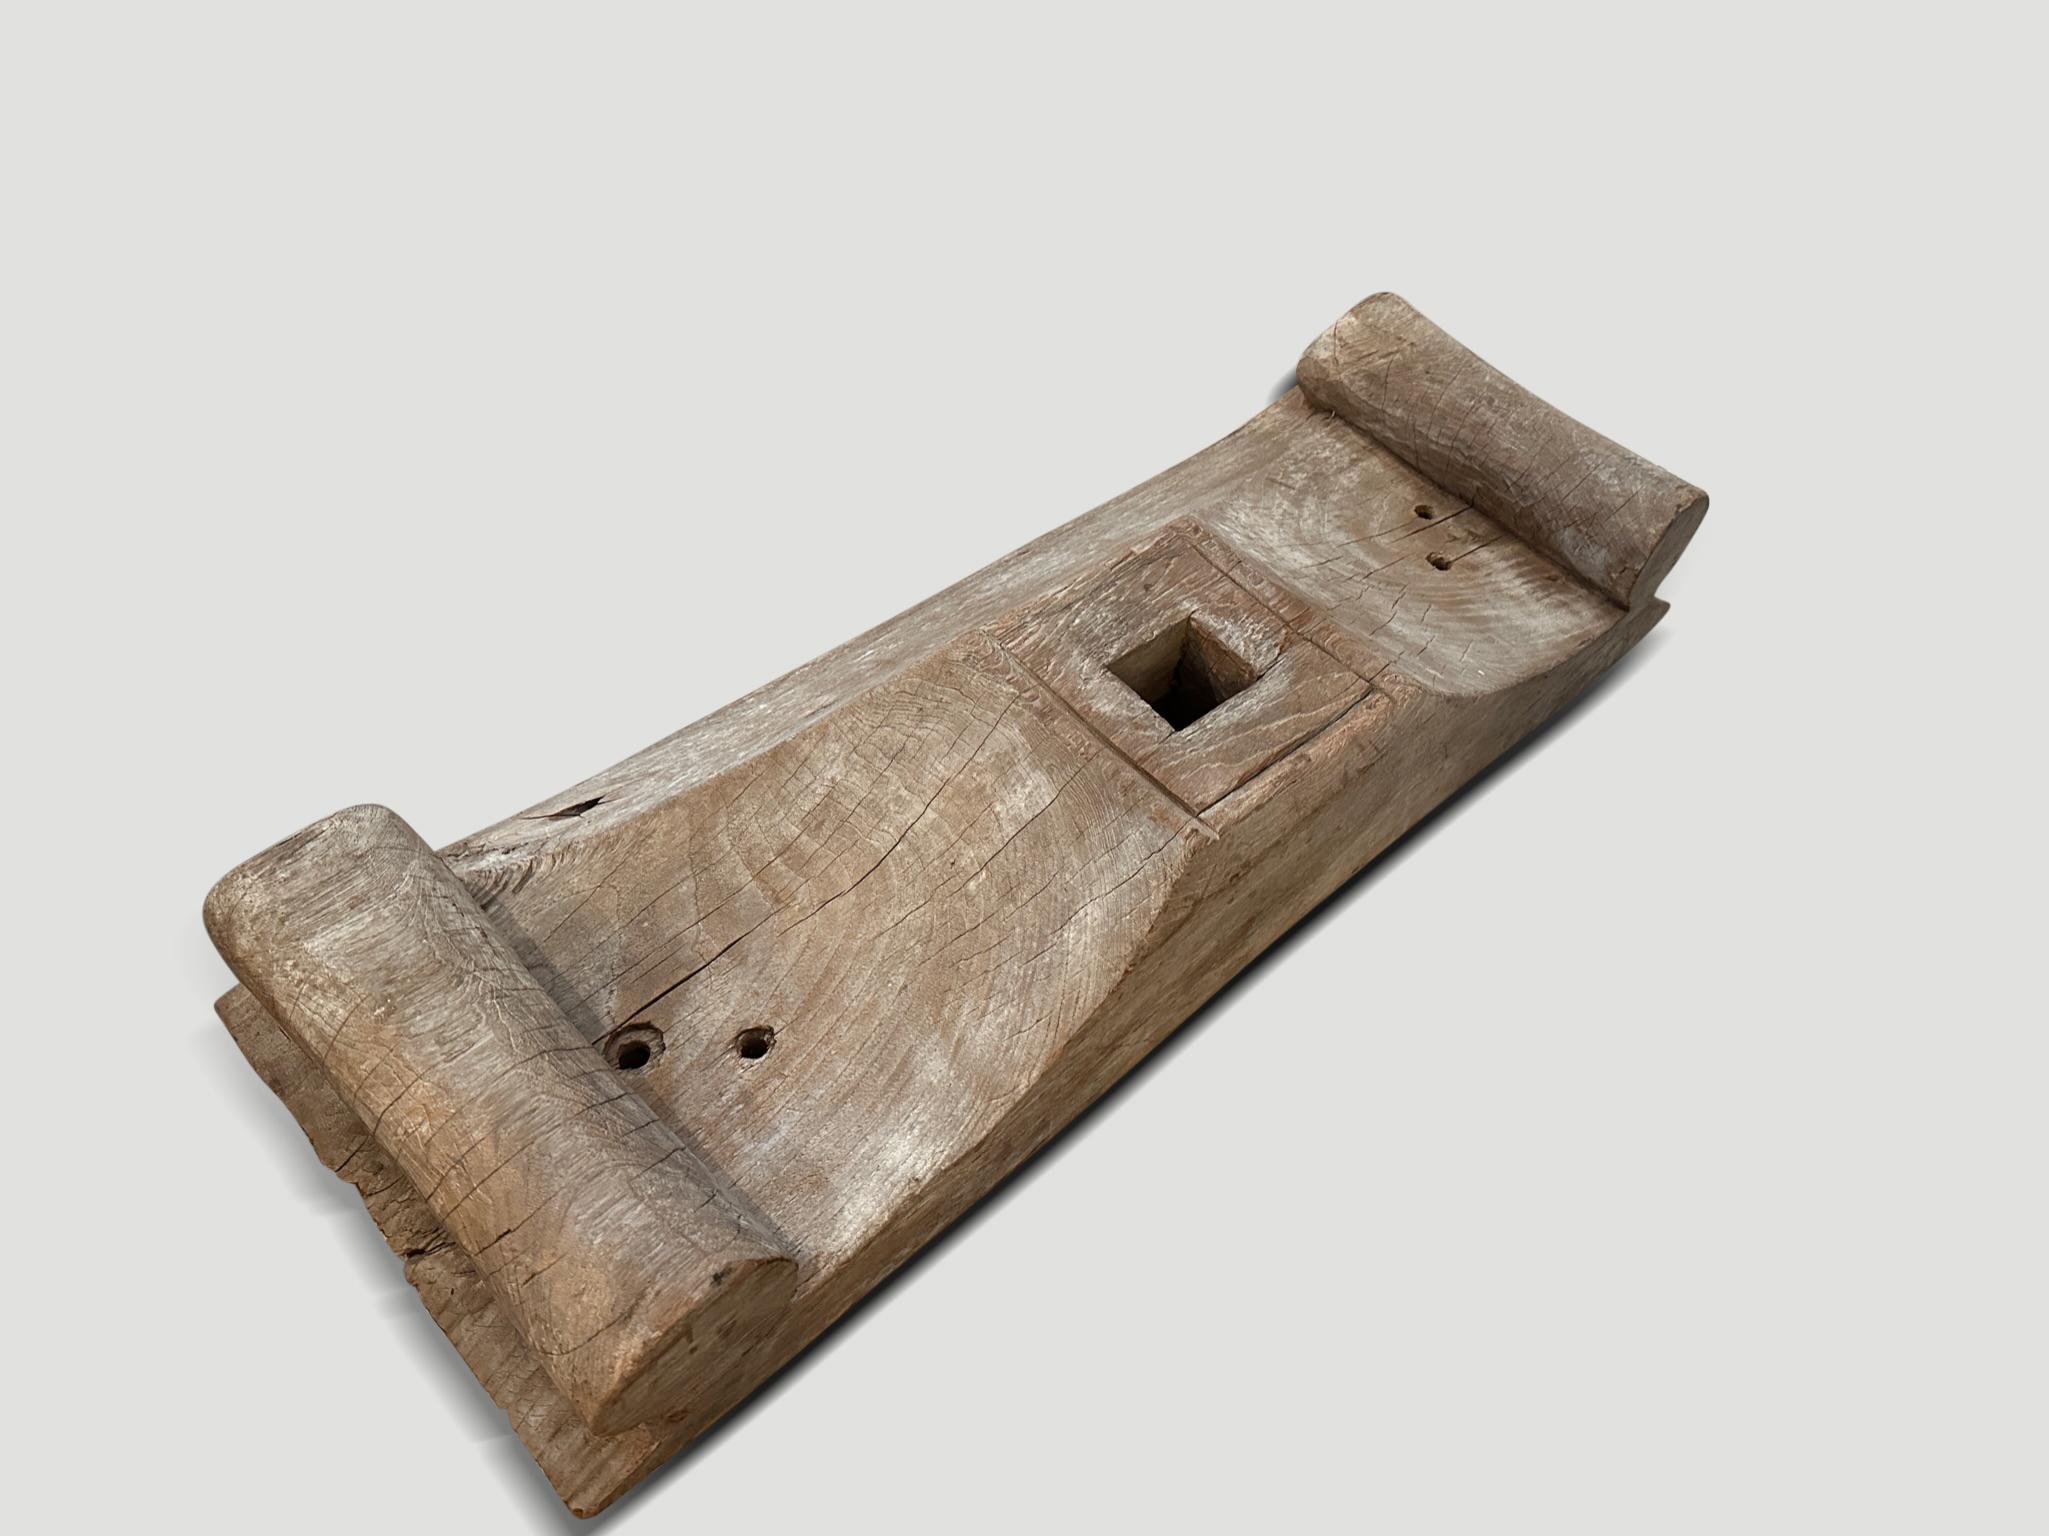 Beautiful architectural base with hand carved scrolls on each end. Originally used as a base for an interior column, hence the hole in the center. Three sides are bevelled and one side flat, so this could also be hung and used as a shelf, as shown